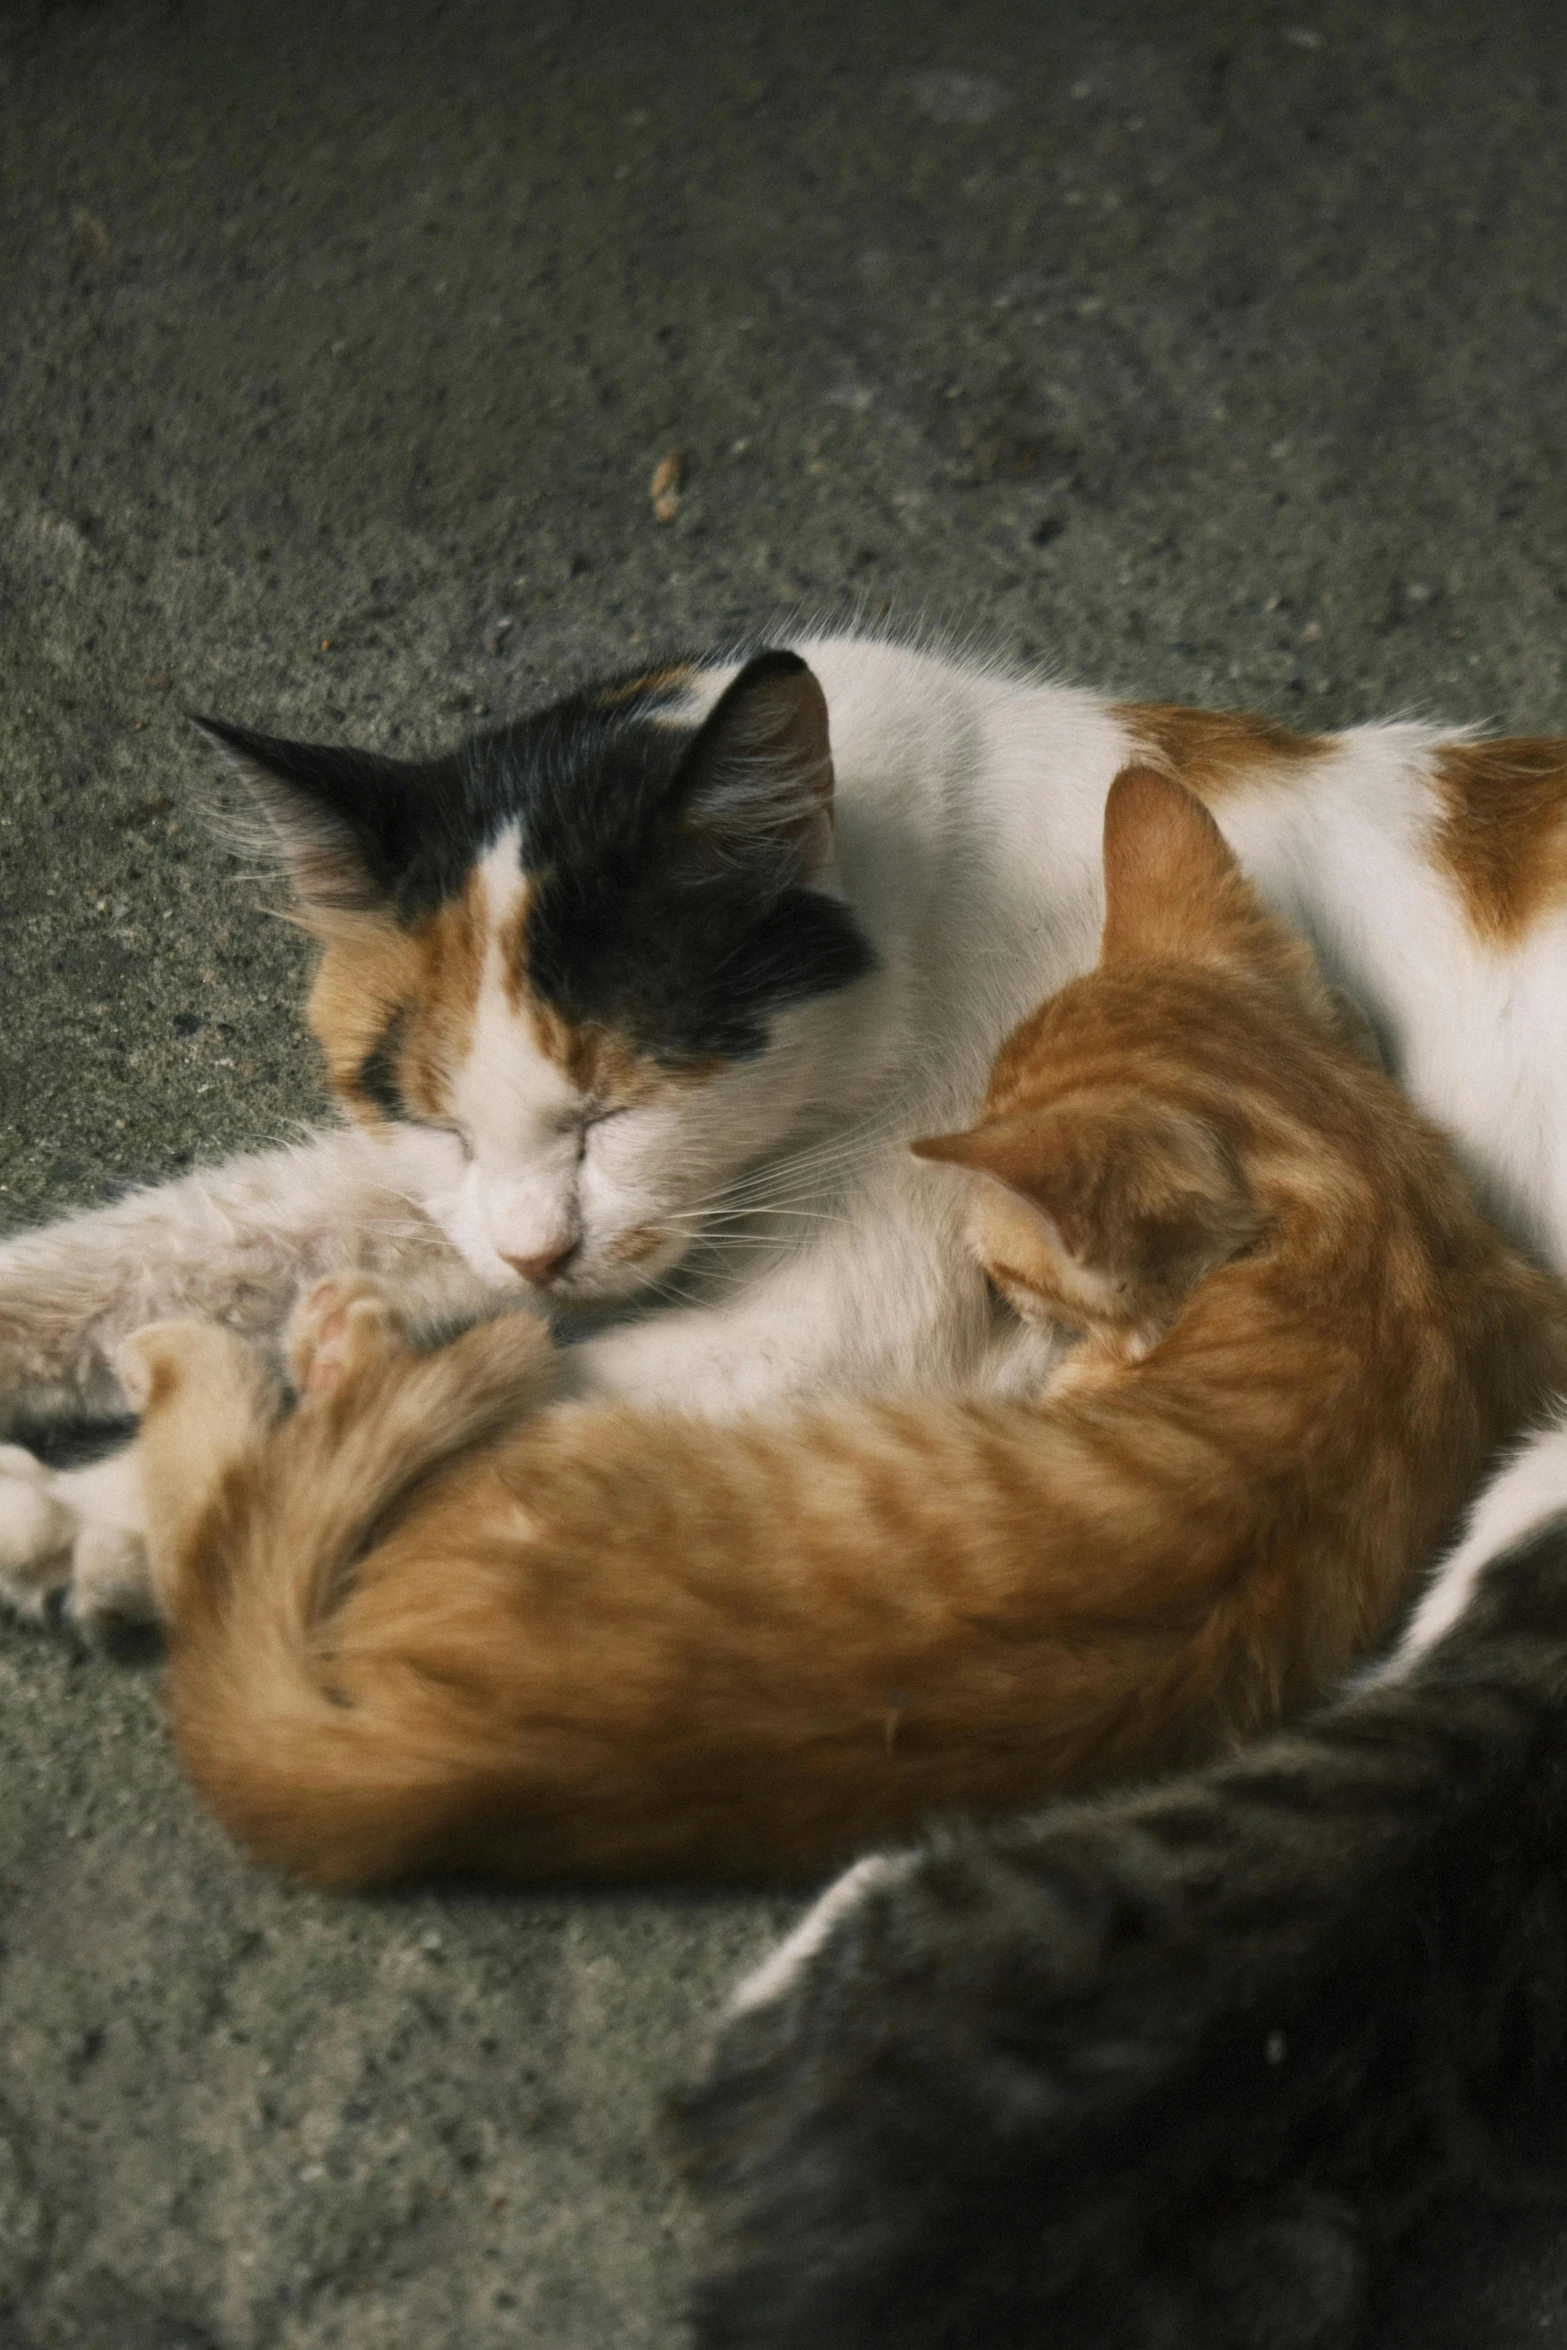 two cats are sleeping next to each other